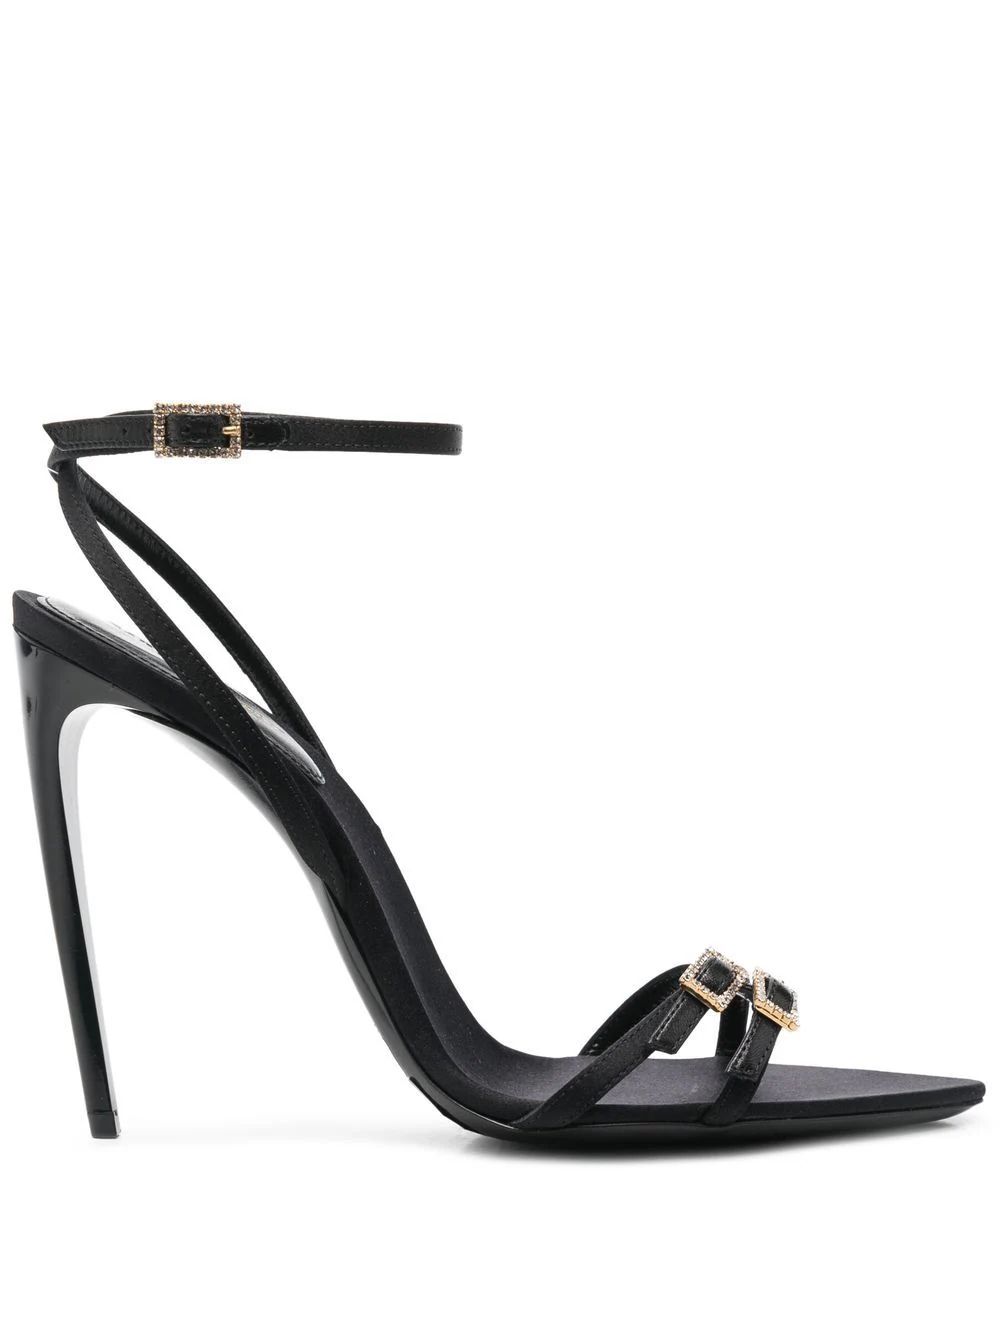 New Nuit 100mm sandals | Farfetch Global